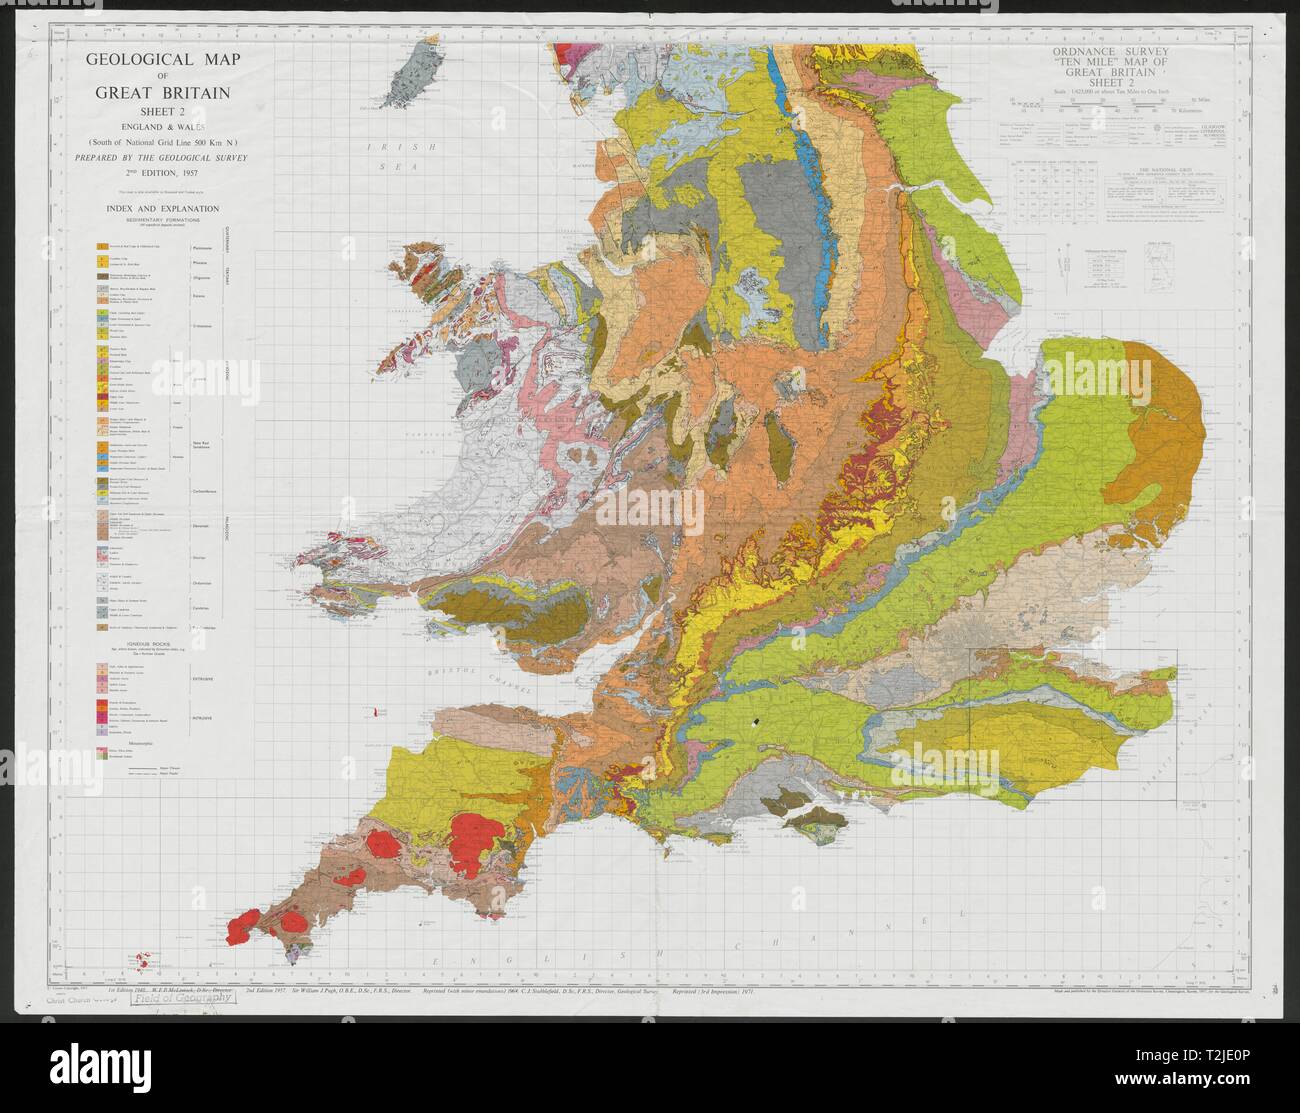 Geological map of Great Britain Sheet 2. South. England & Wales 1971 old Stock Photo